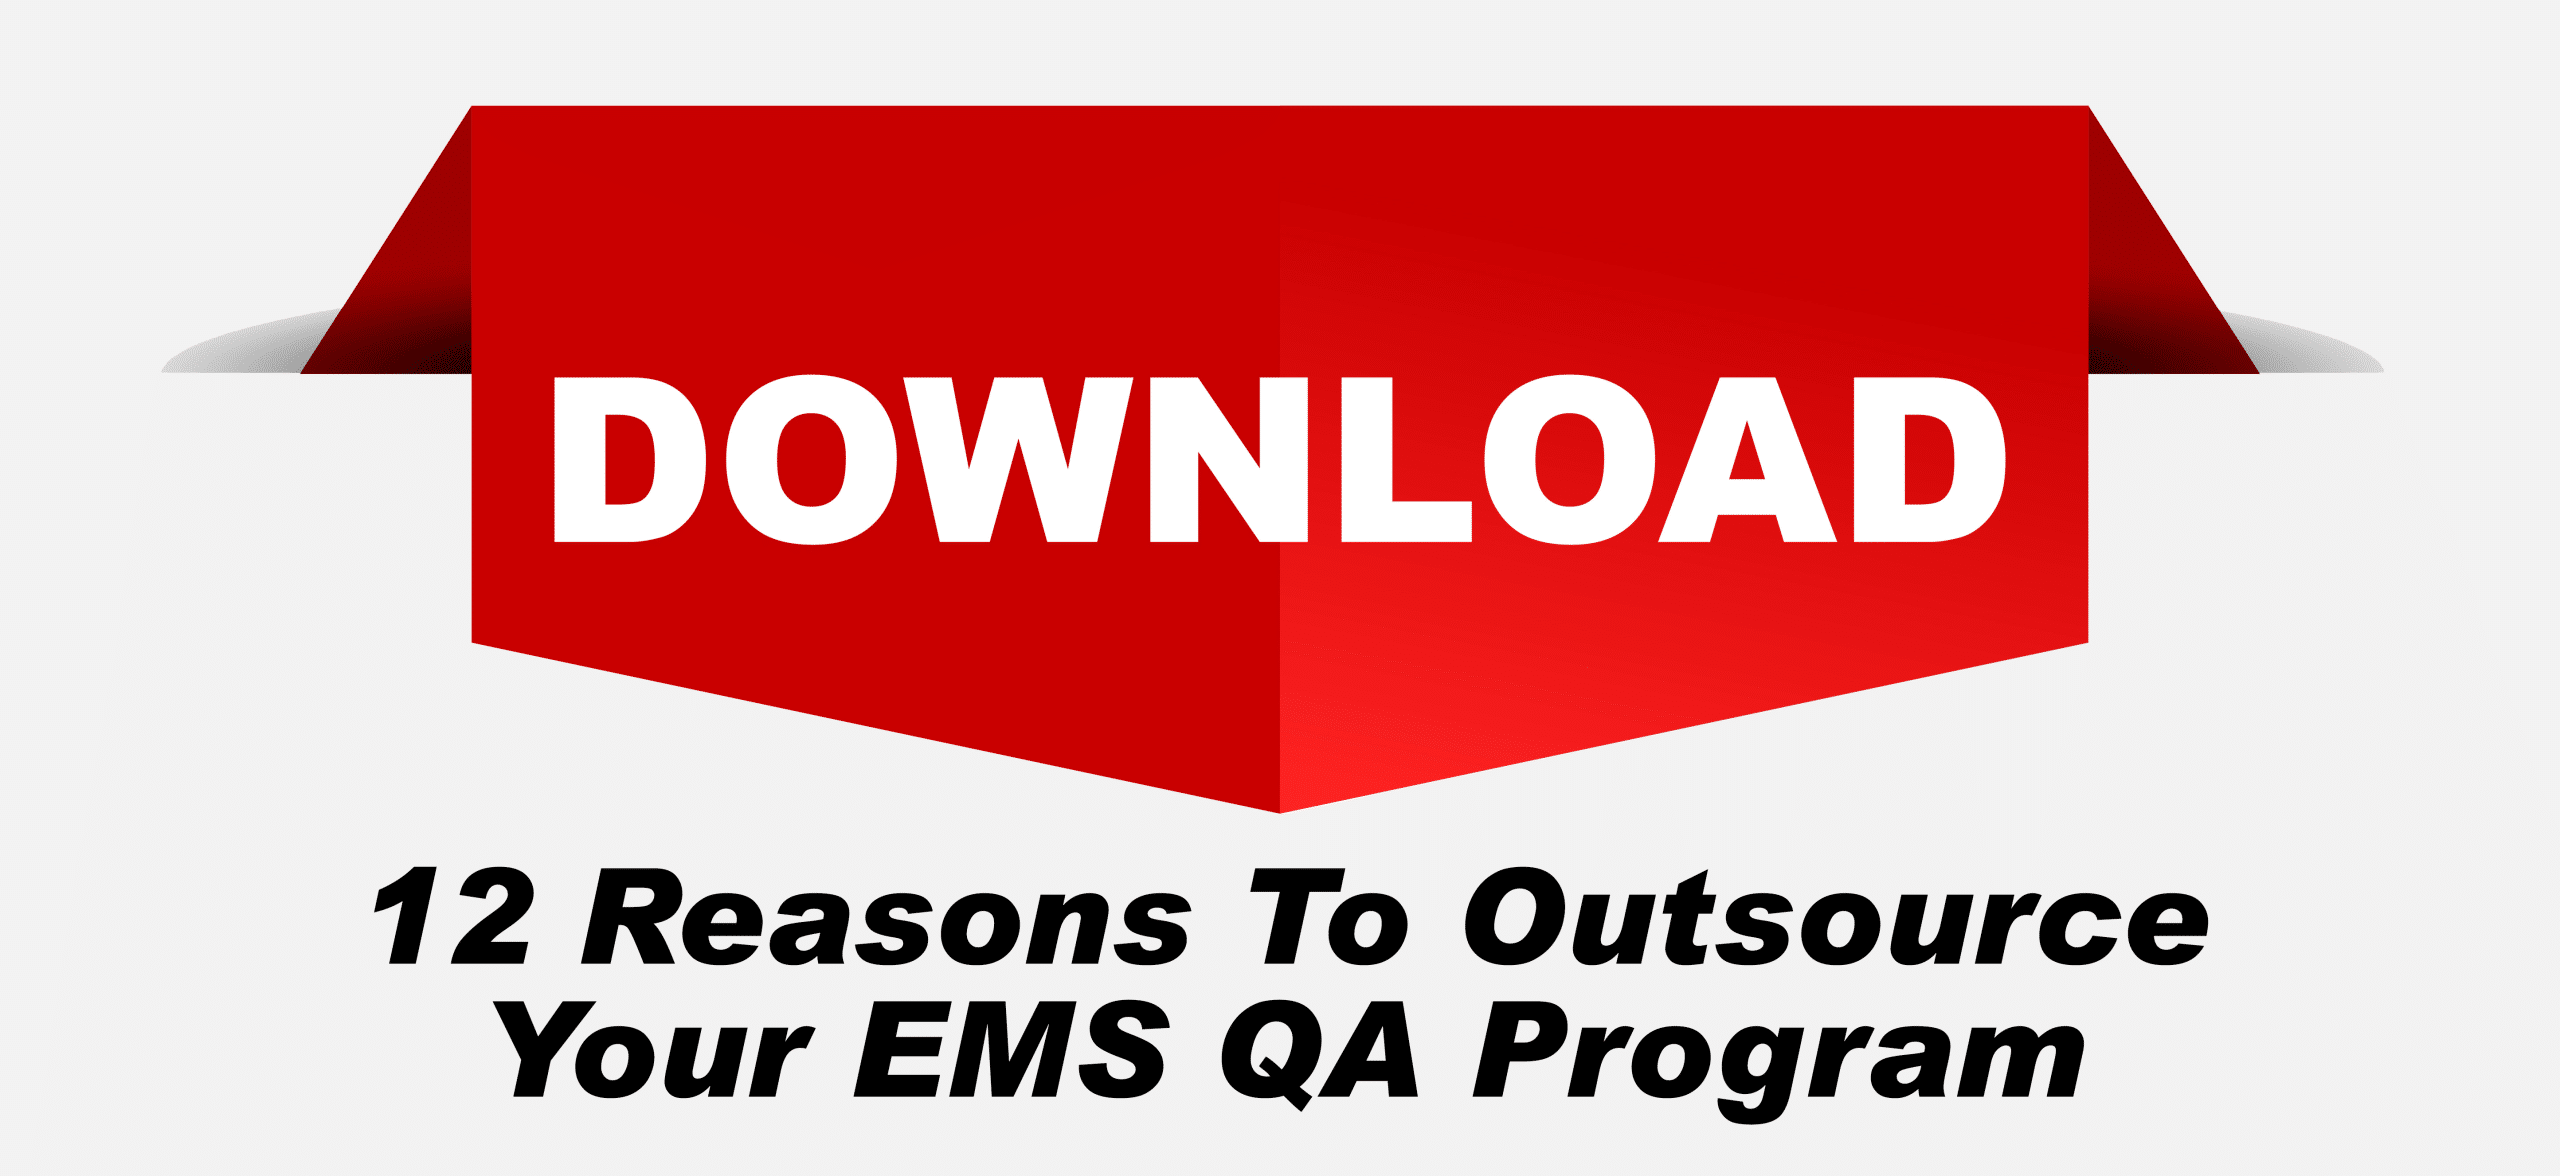 12 Reasons to Outsource Your EMS CQI Program